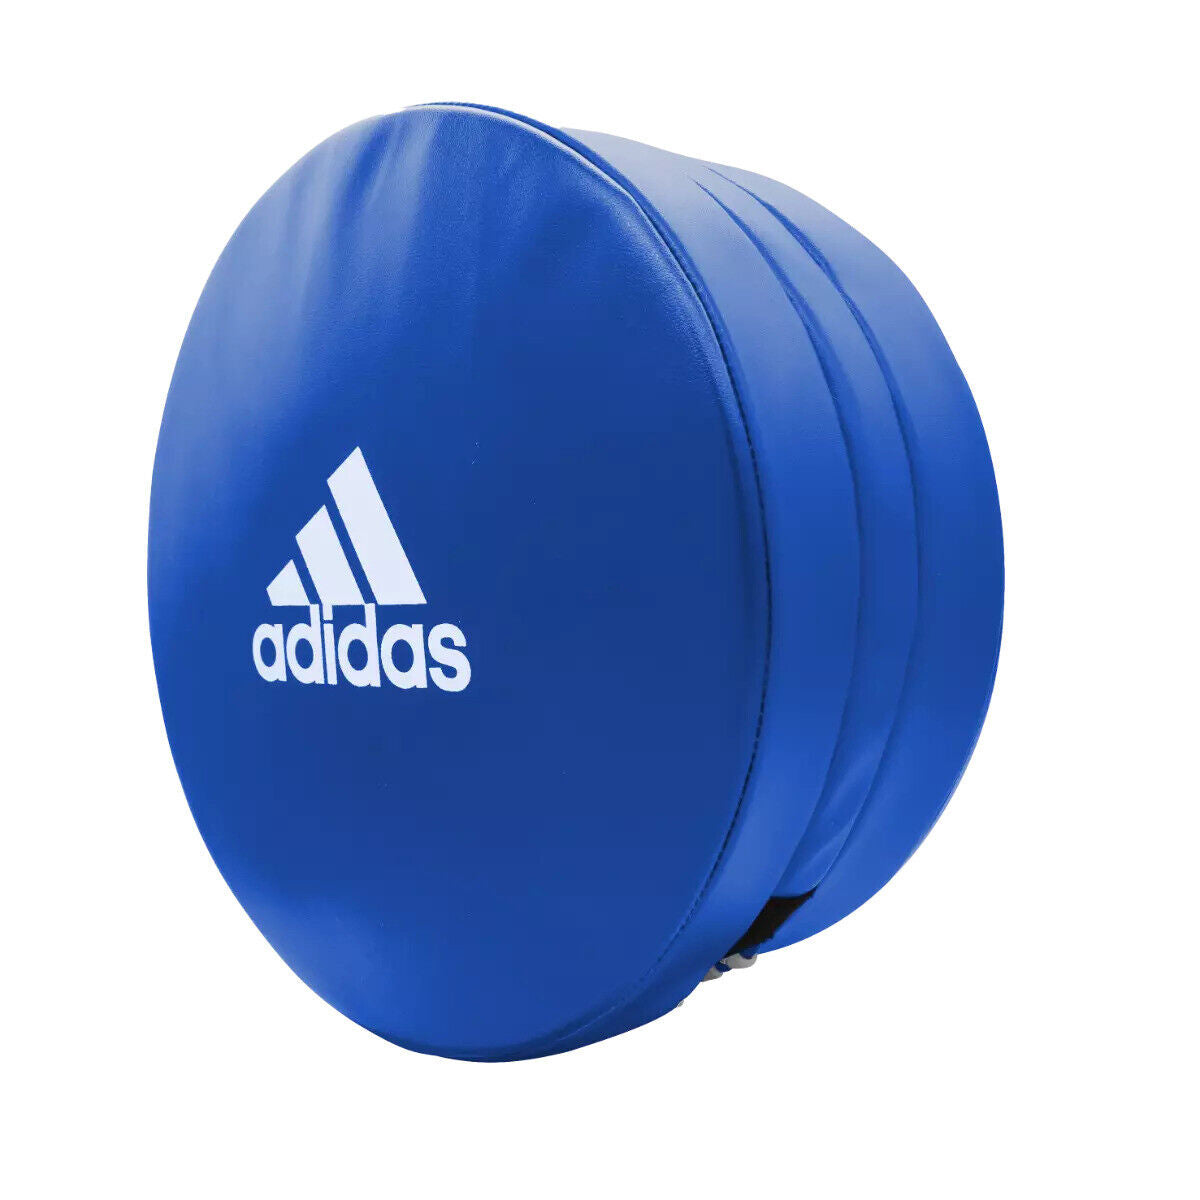 adidas Double-Faced Boxing Pads Focus Mitts Martial Arts